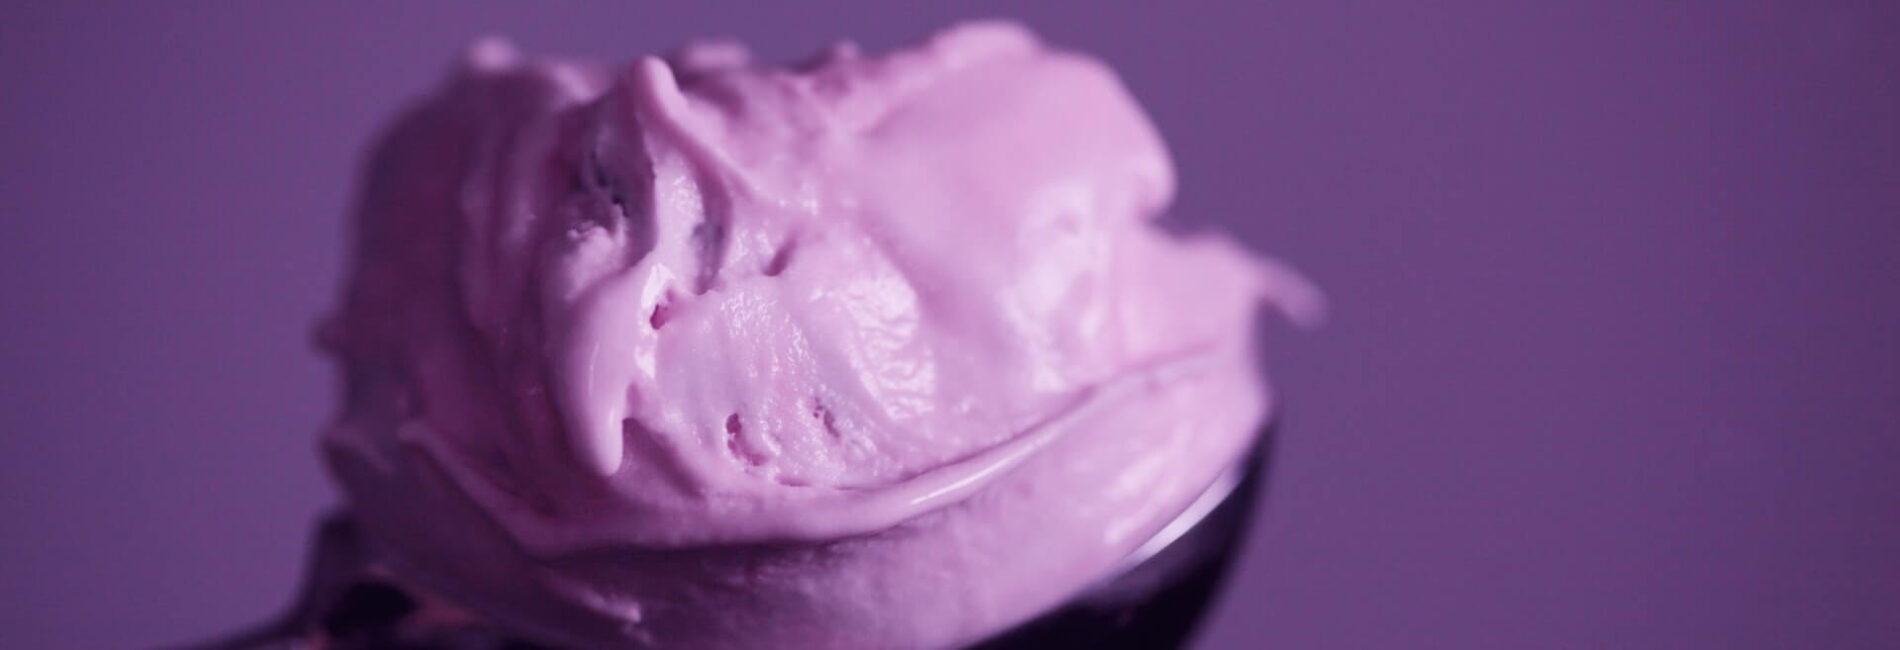 Enjoy Some Lavender Ice Cream with the Movie “It’s Complicated”